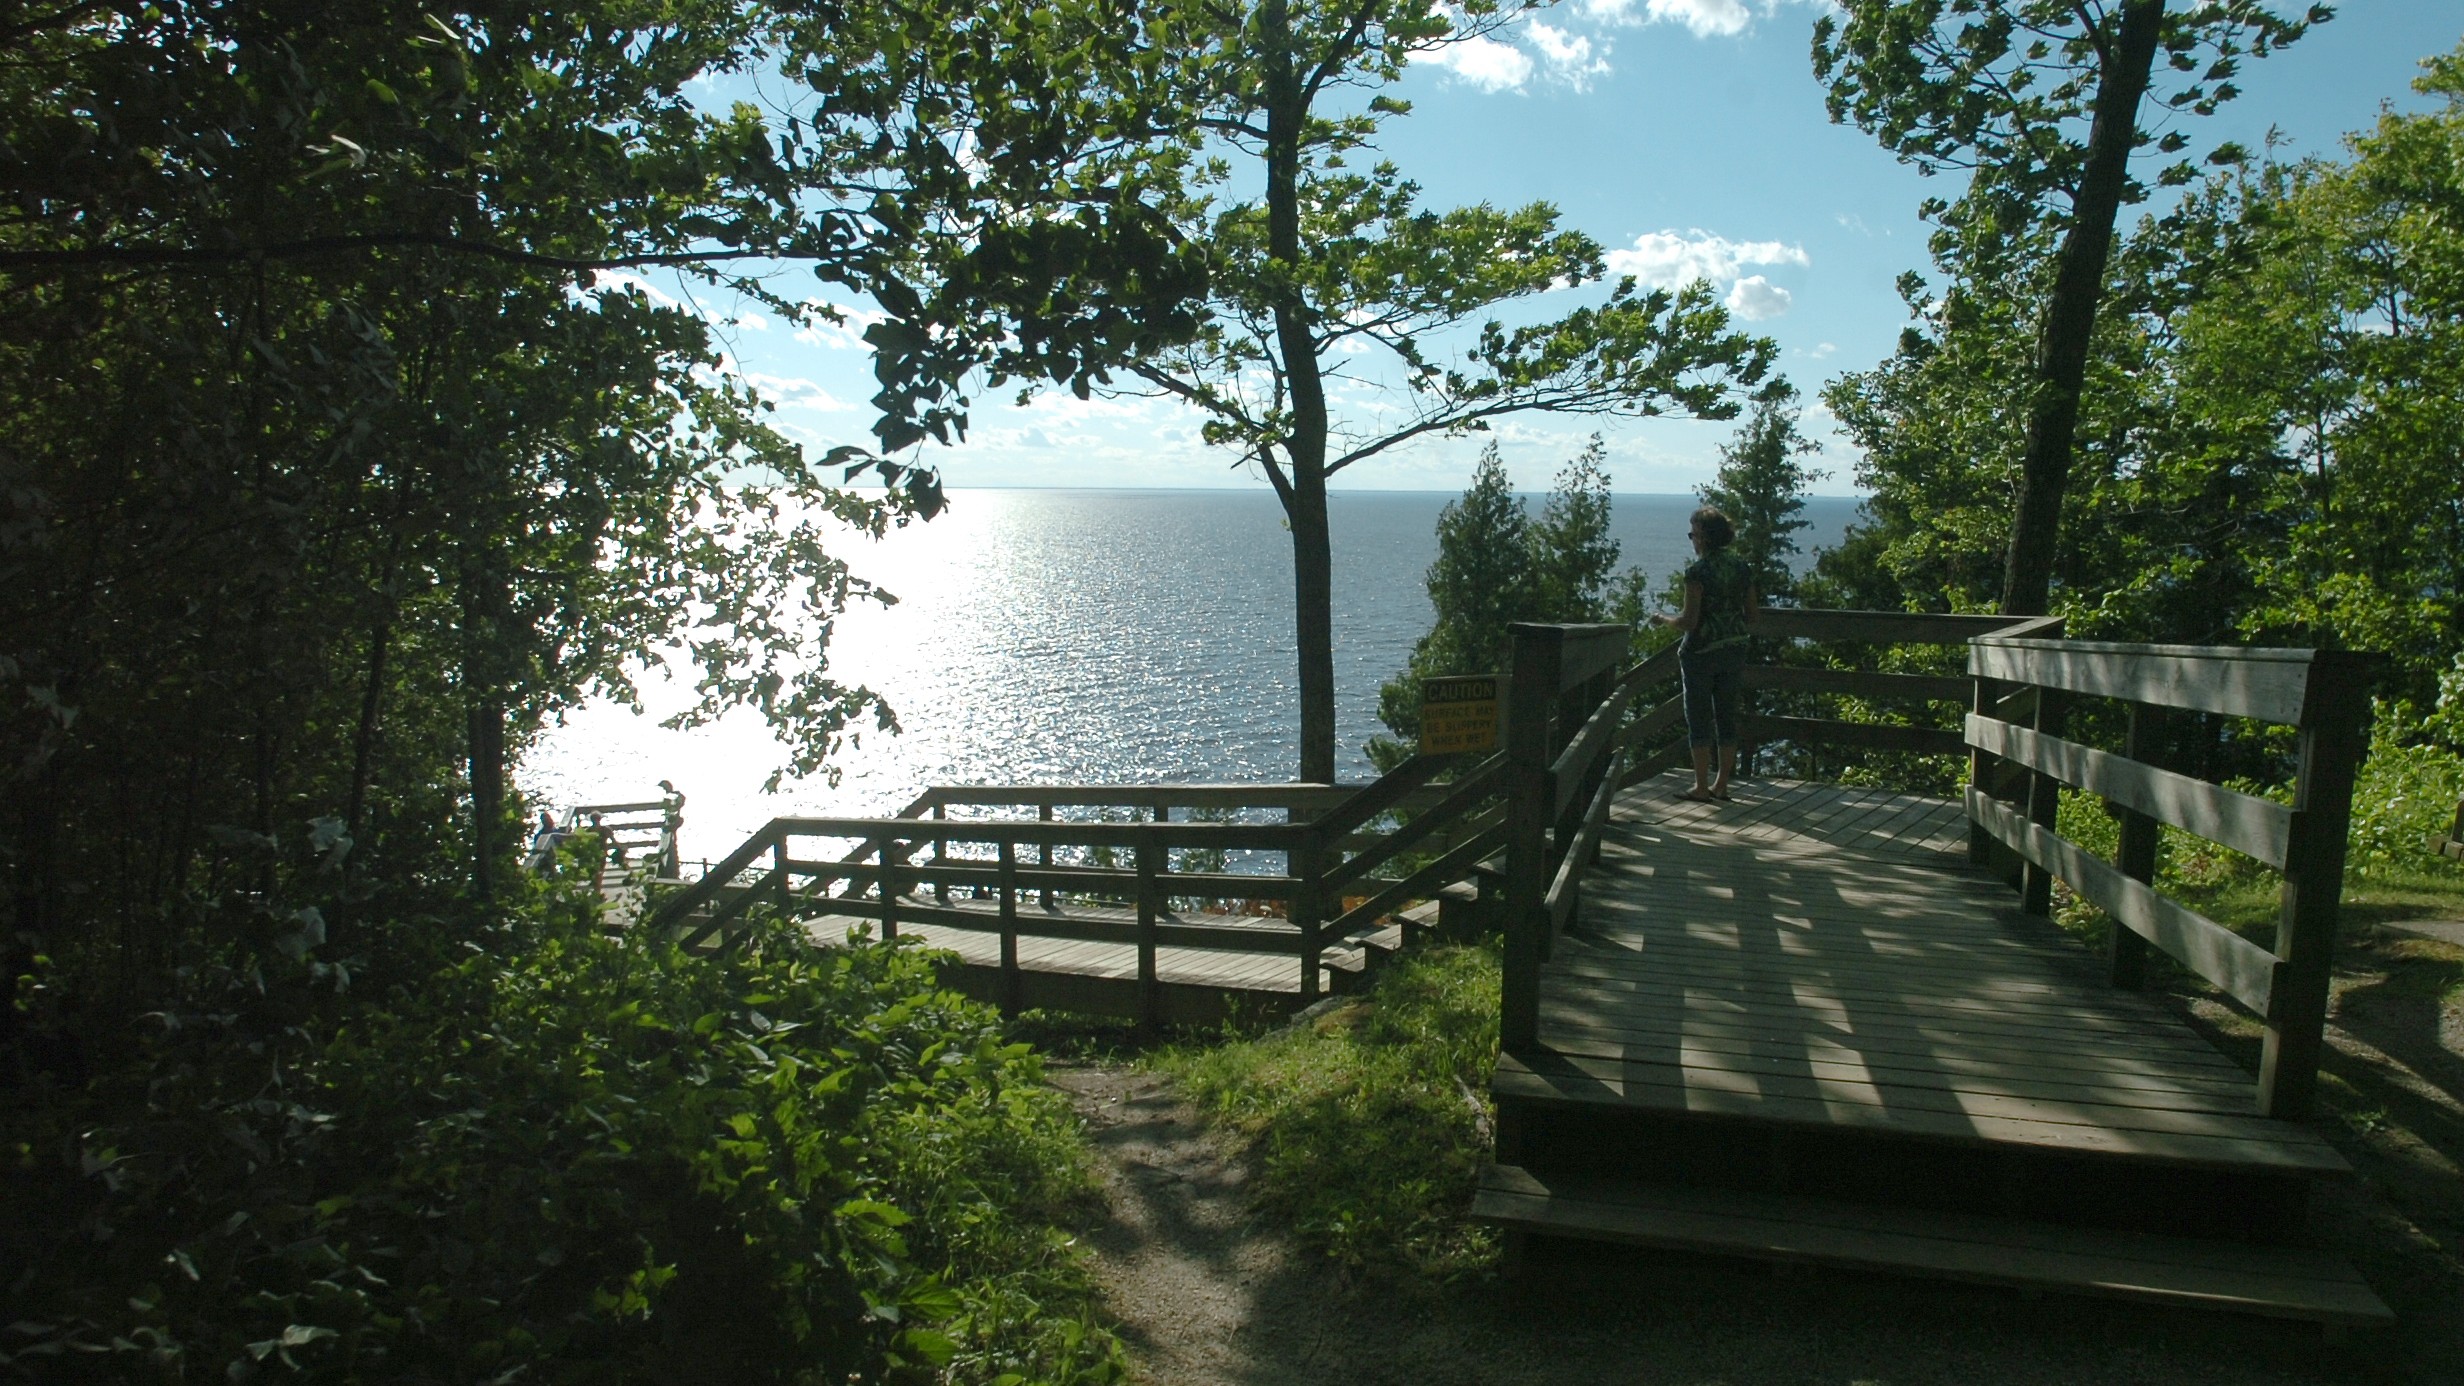 Ellison Bluff County Park offers awe-inspiring views including sunsets and photographic opportunities of the cliffs, Green Bay waters and the many Green Bay Islands.